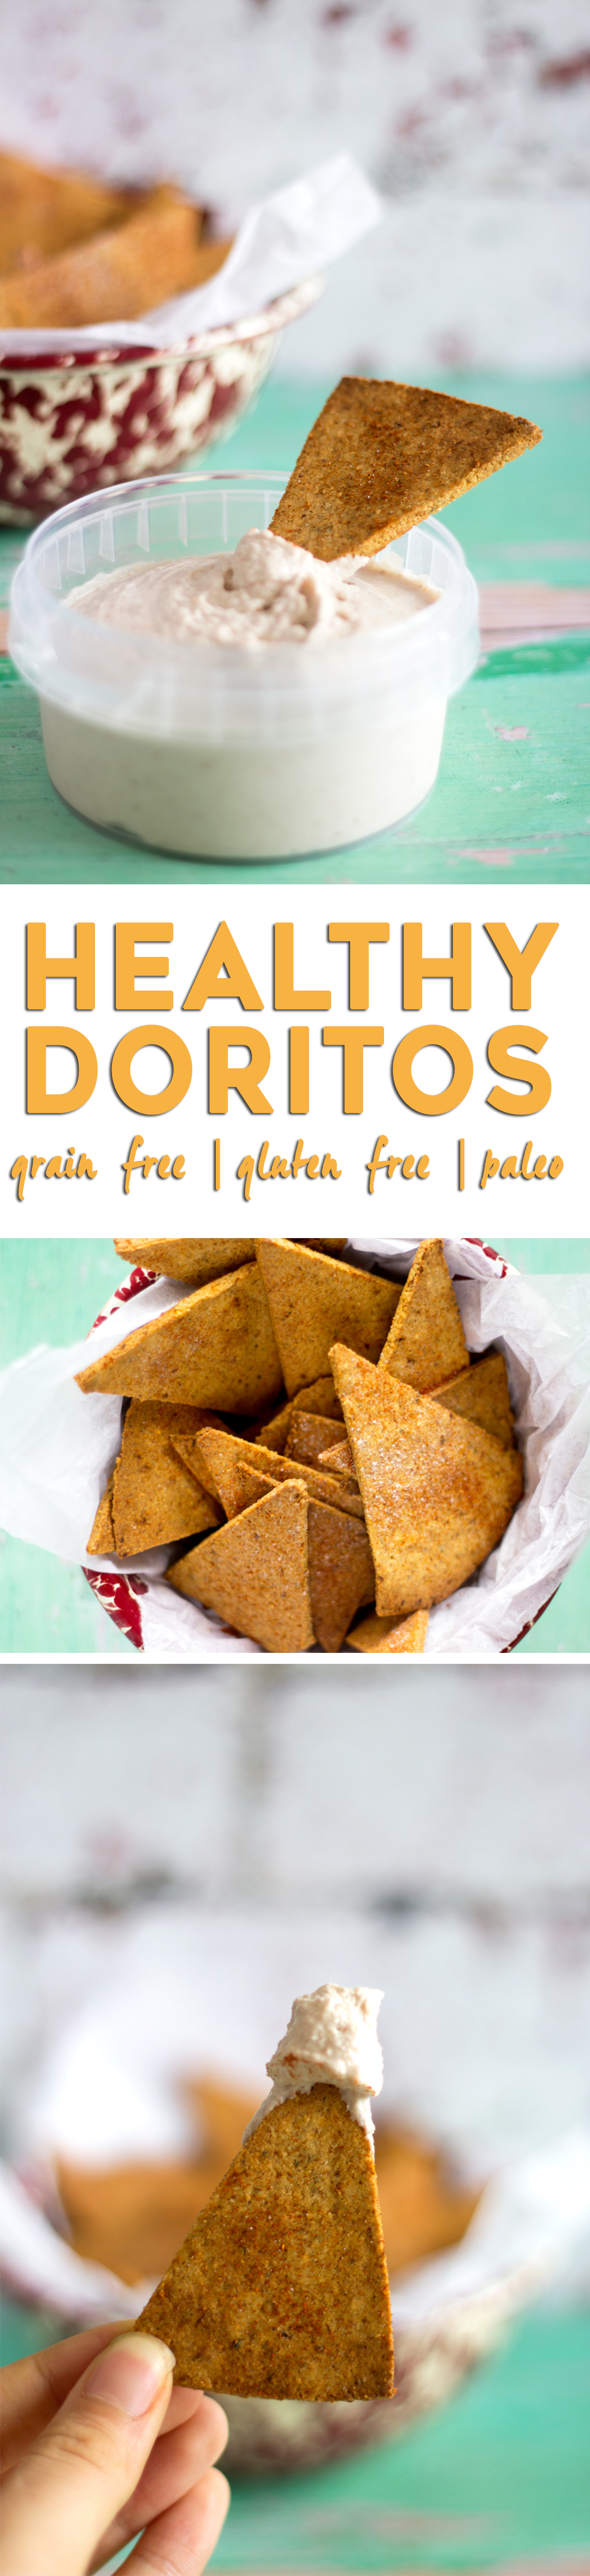 Low Carb & Oven Baked Tortilla Chips - Crispy paleo tortilla, perfect for dipping, like healthy Doritos!